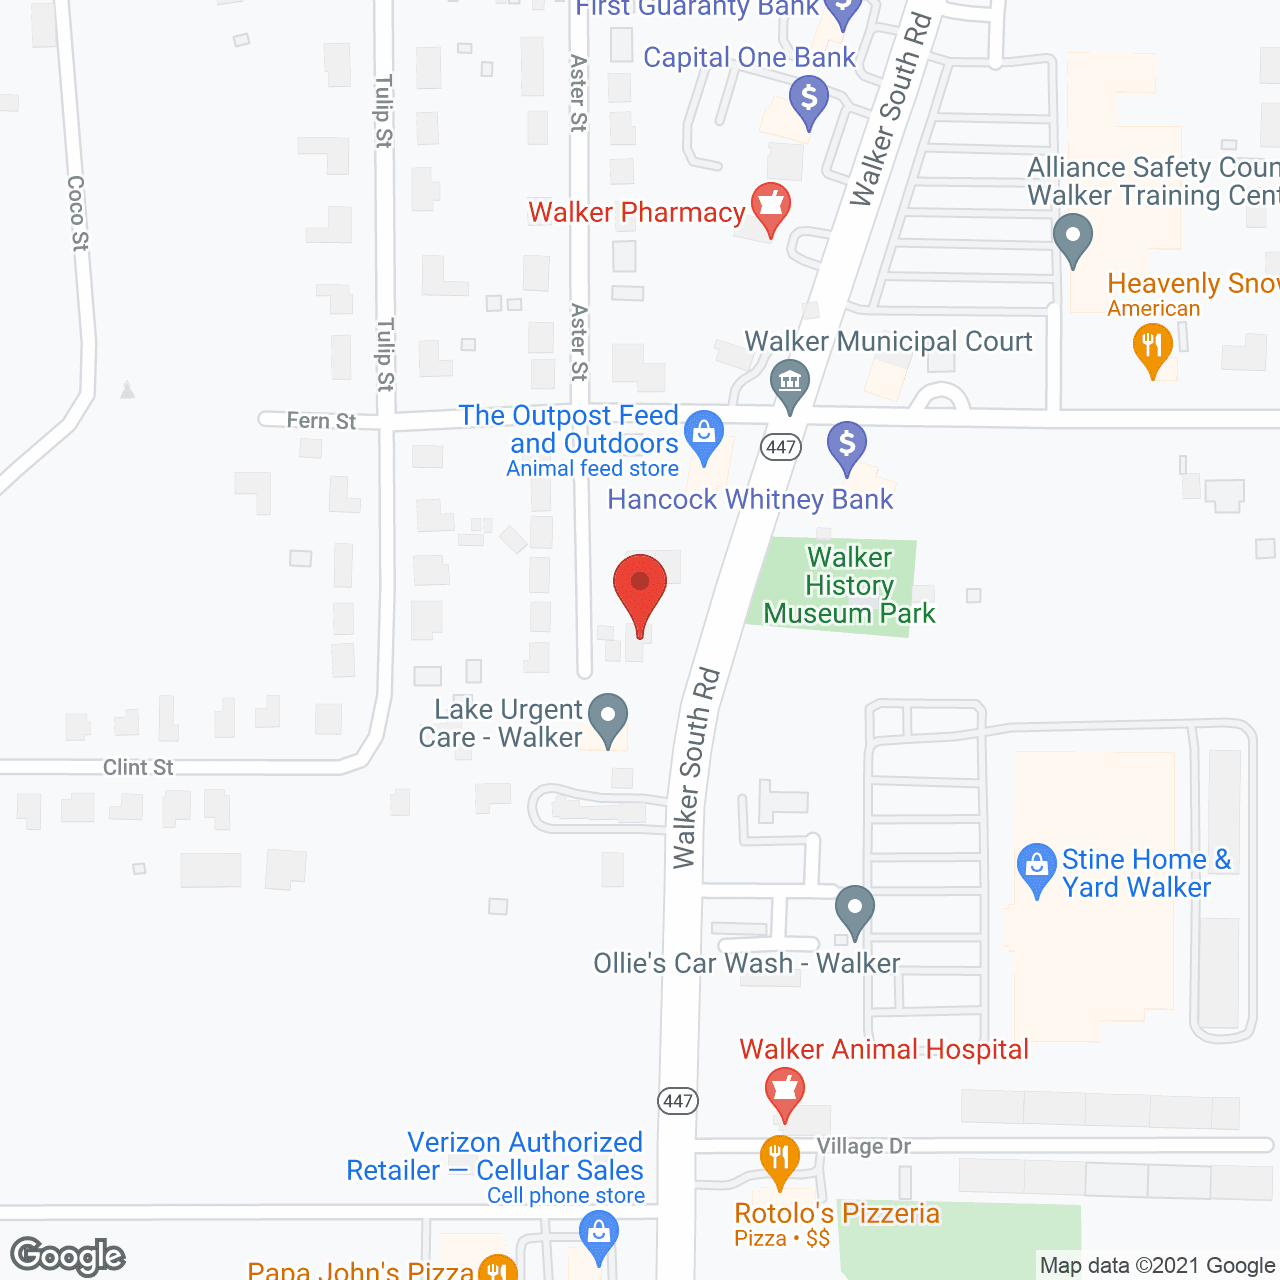 Physicians Choice Physical in google map